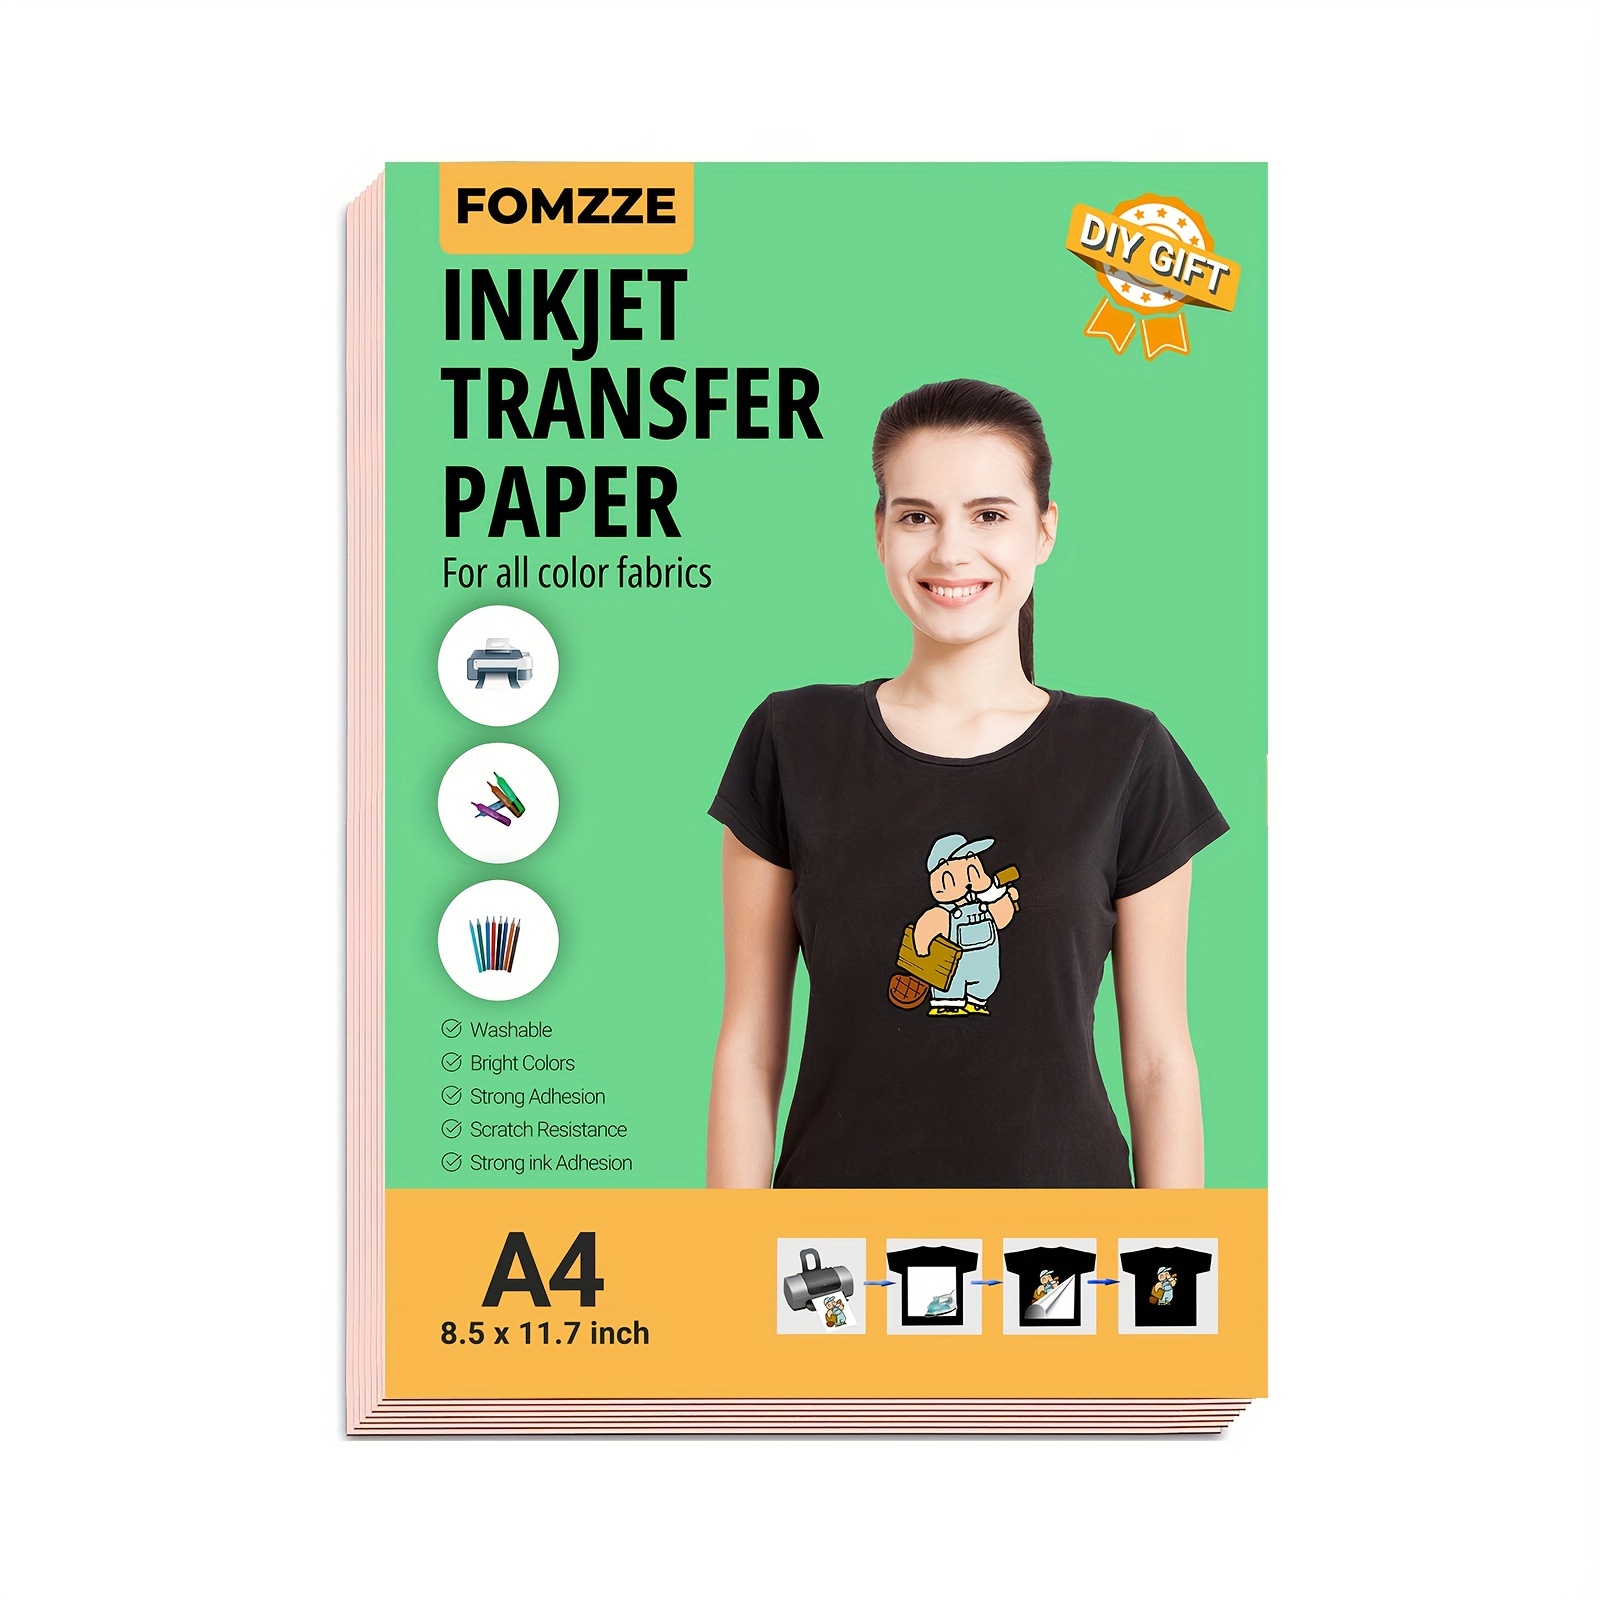 A4 Light Color Heat Transfer Paper For T-Shirts, Bags, Pillows, Vinyl &  Digital Printing On Clothes